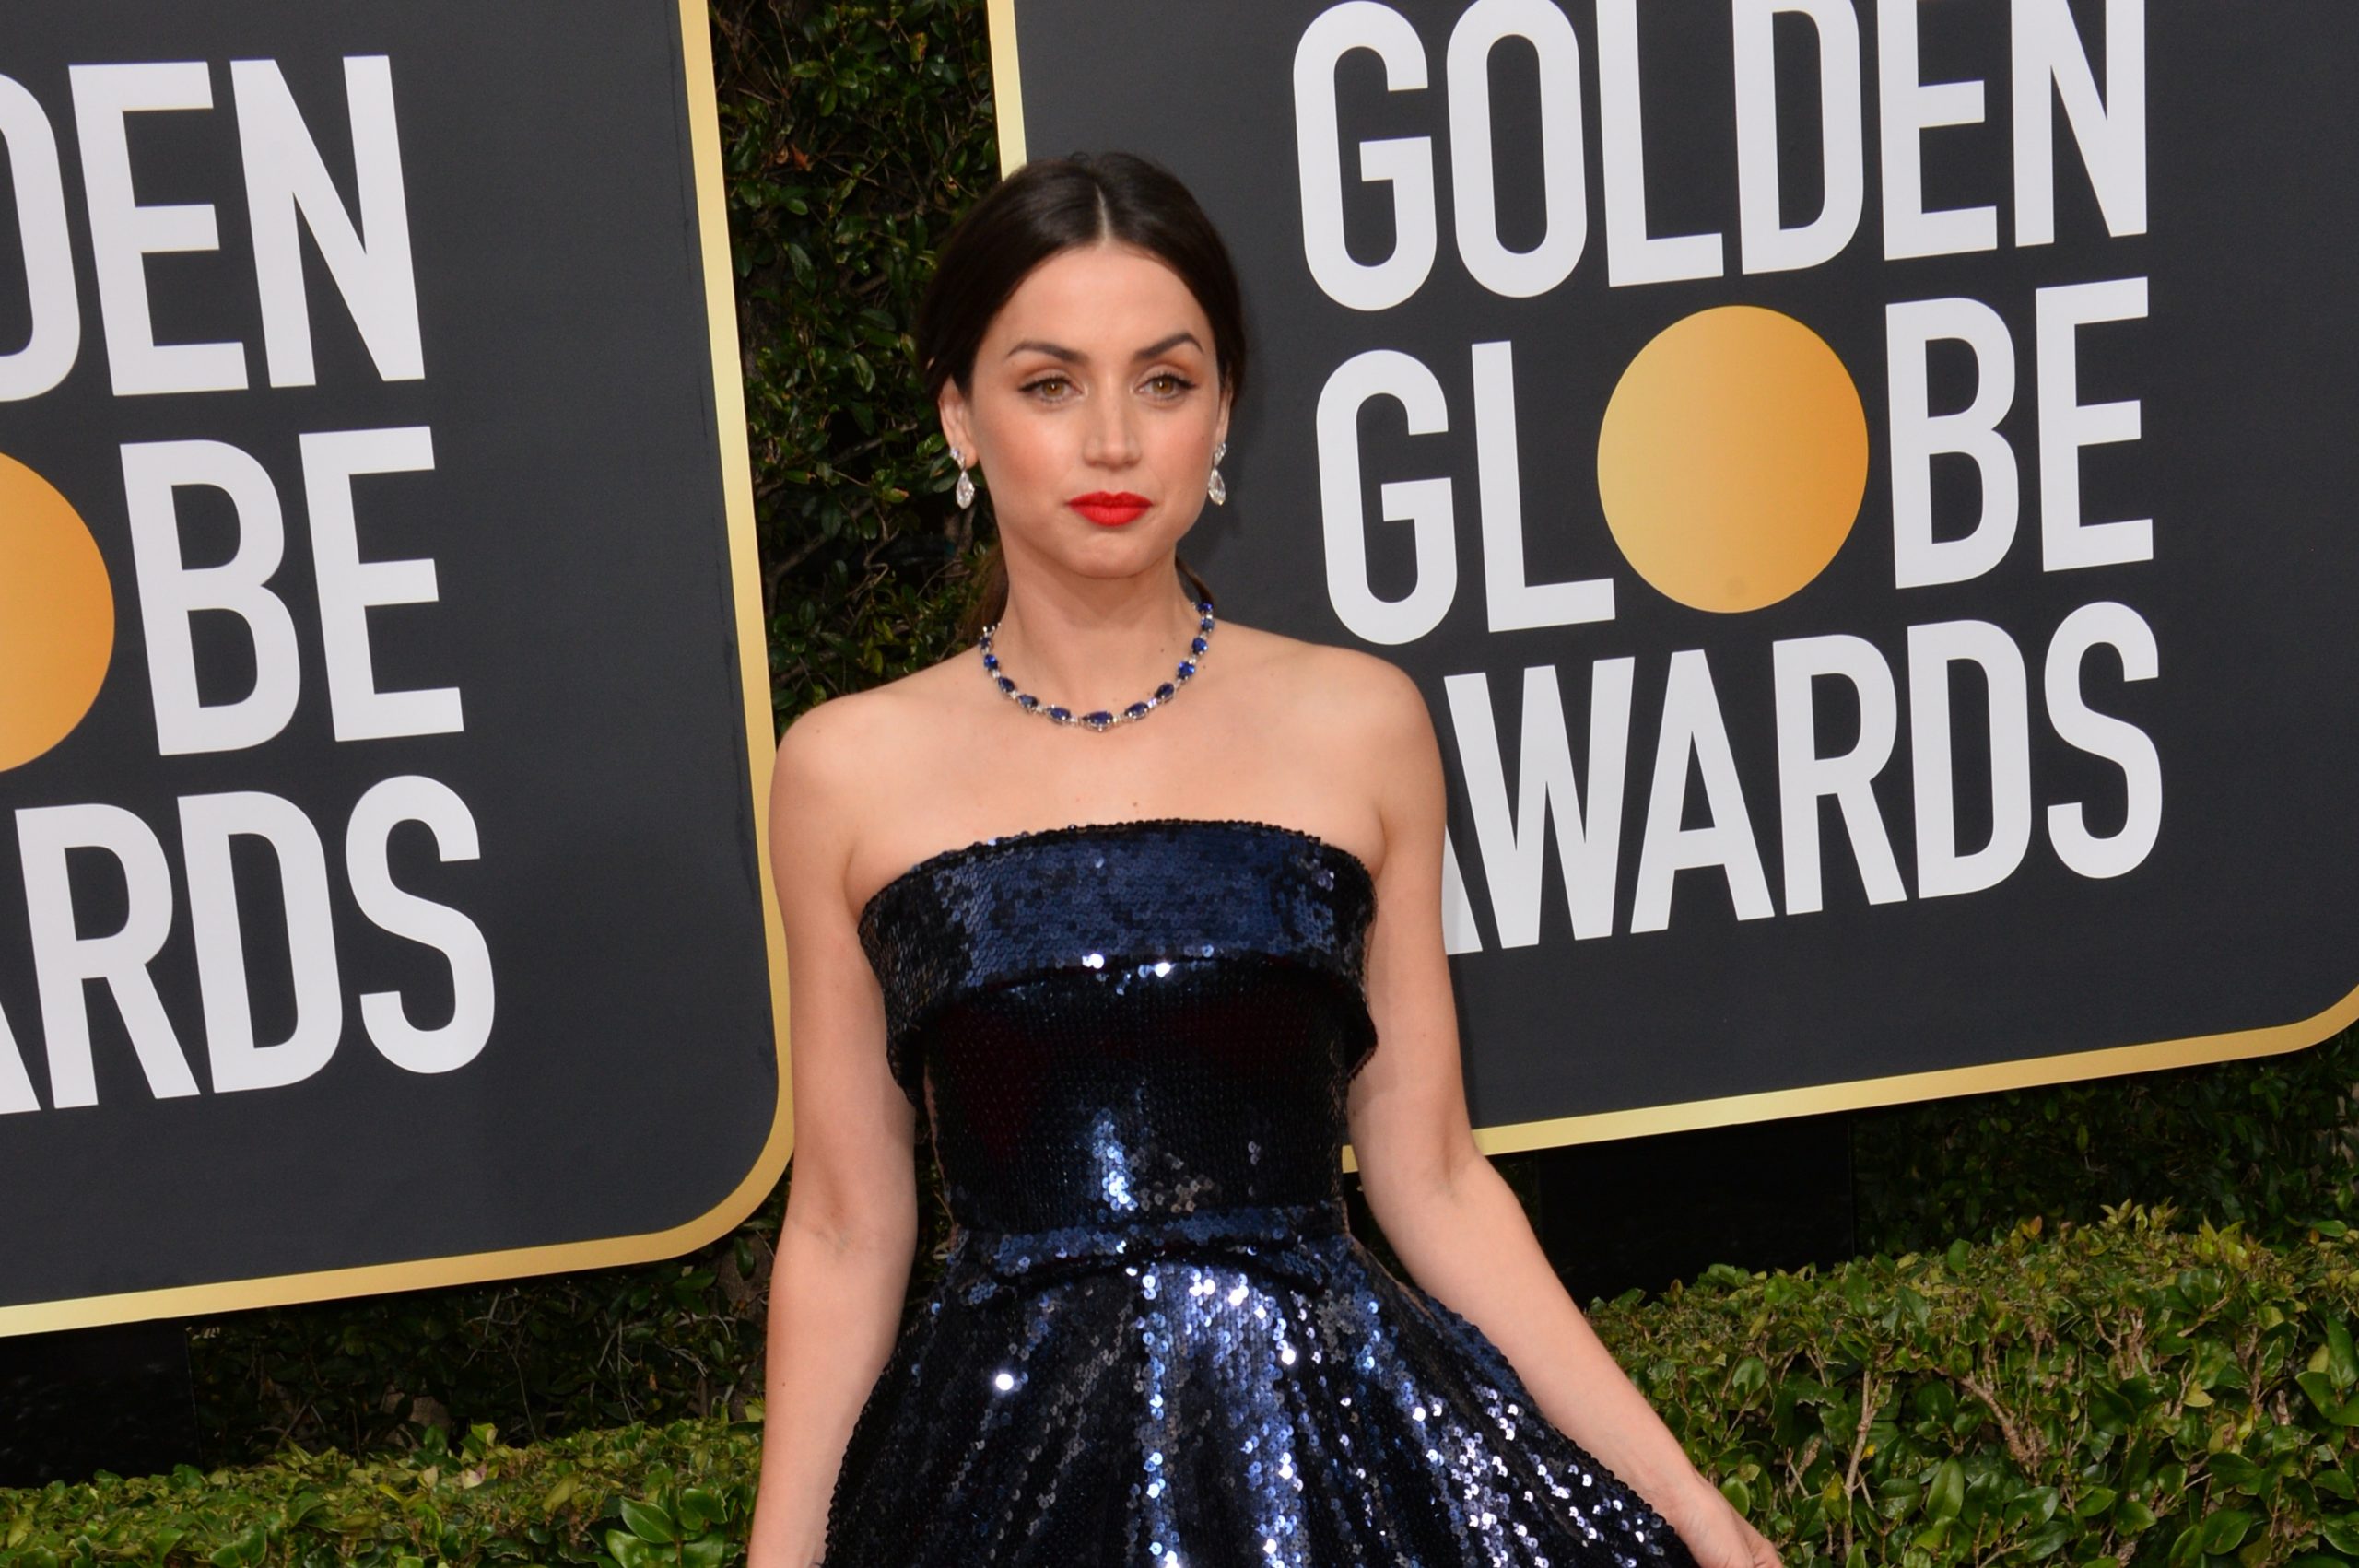 Watch: Celebrity Ana de Armas shines in customized gown and jewelry from Paris design house